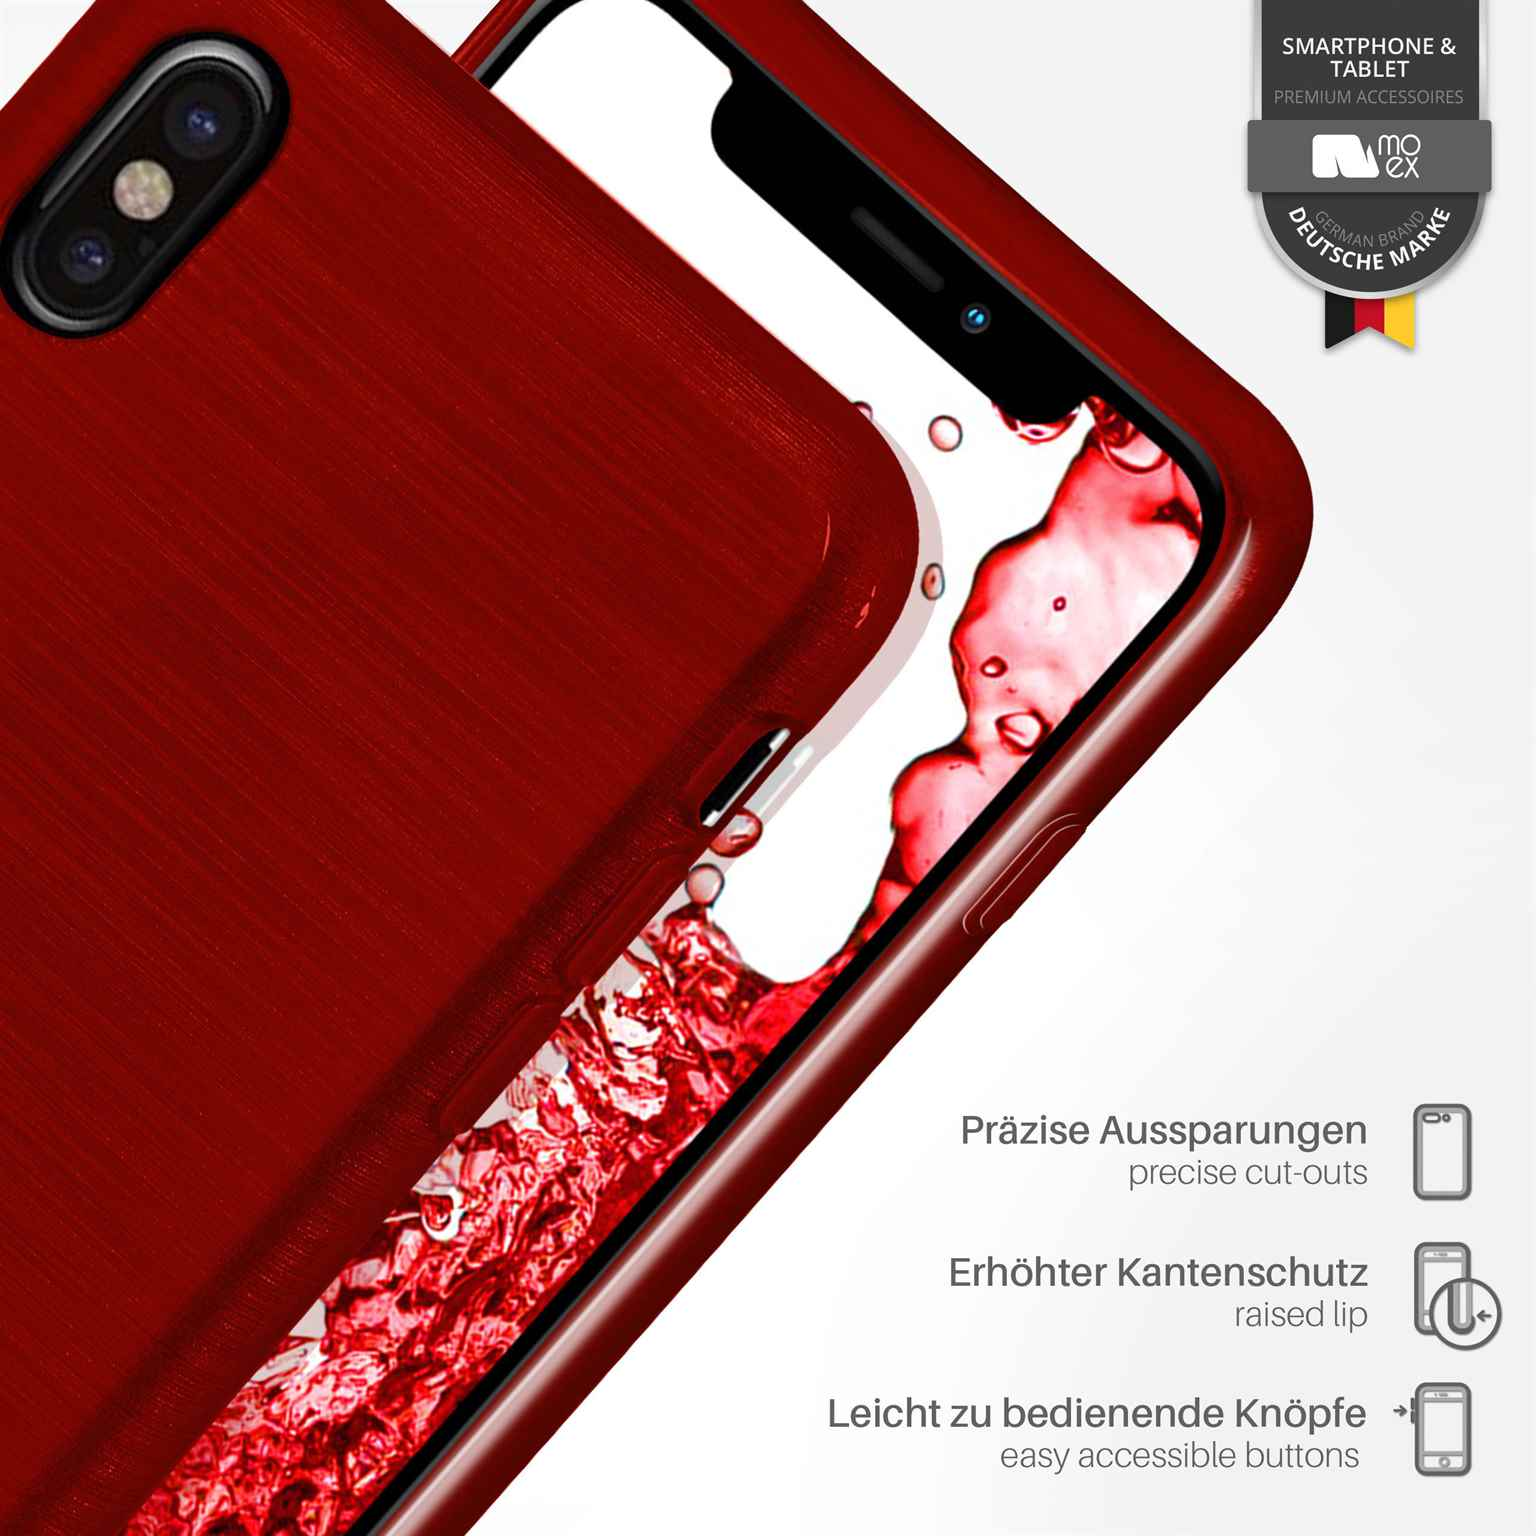 XS, MOEX Backcover, Brushed iPhone Apple, Case, Crimson-Red